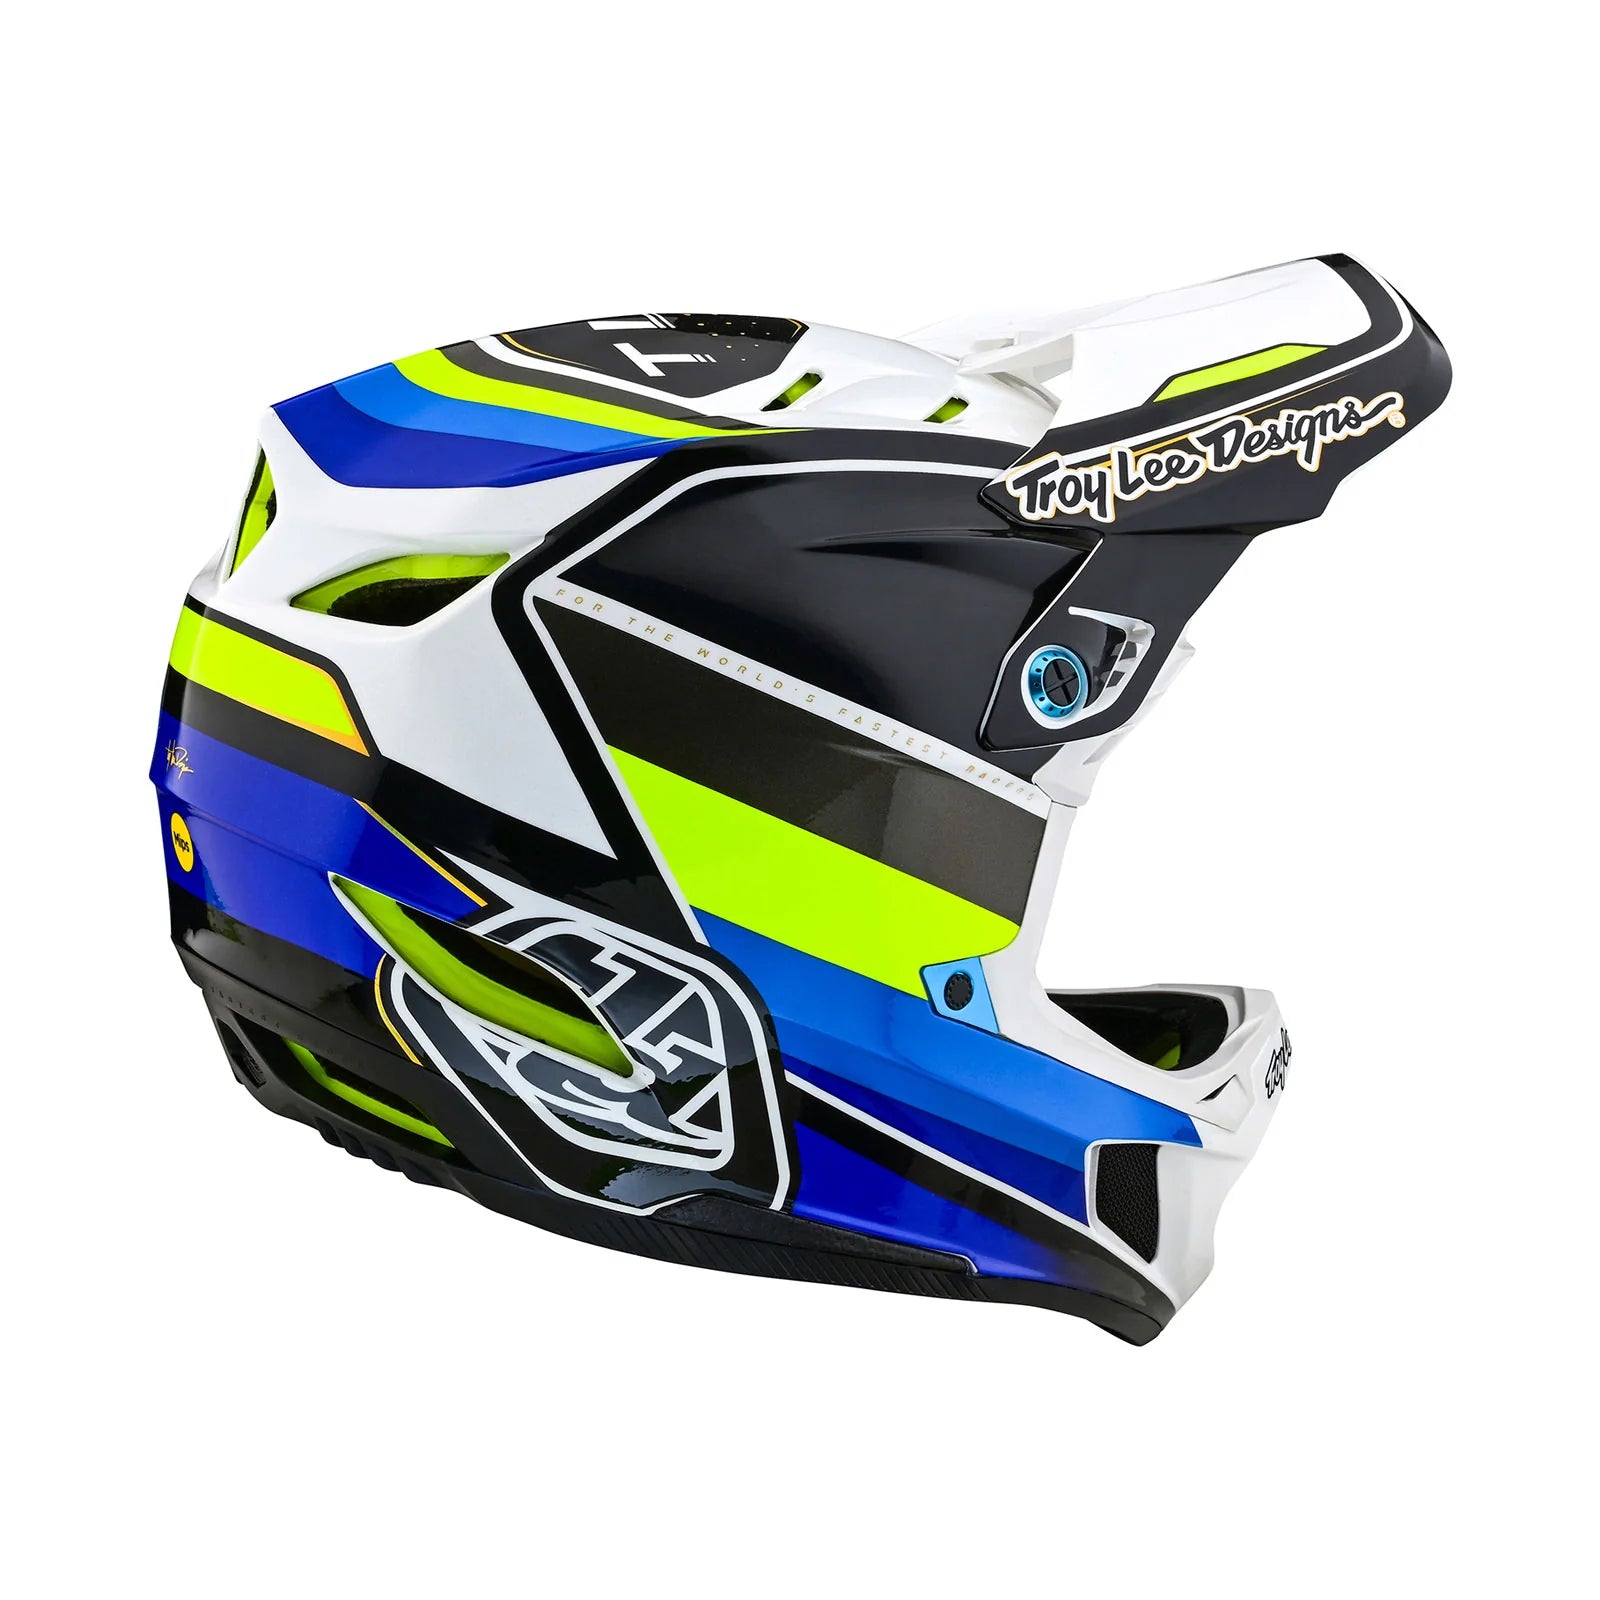 A TLD D4 AS Composite Helmet W/MIPS Reverb White with a blue and yellow design, featuring the Mips protection system.